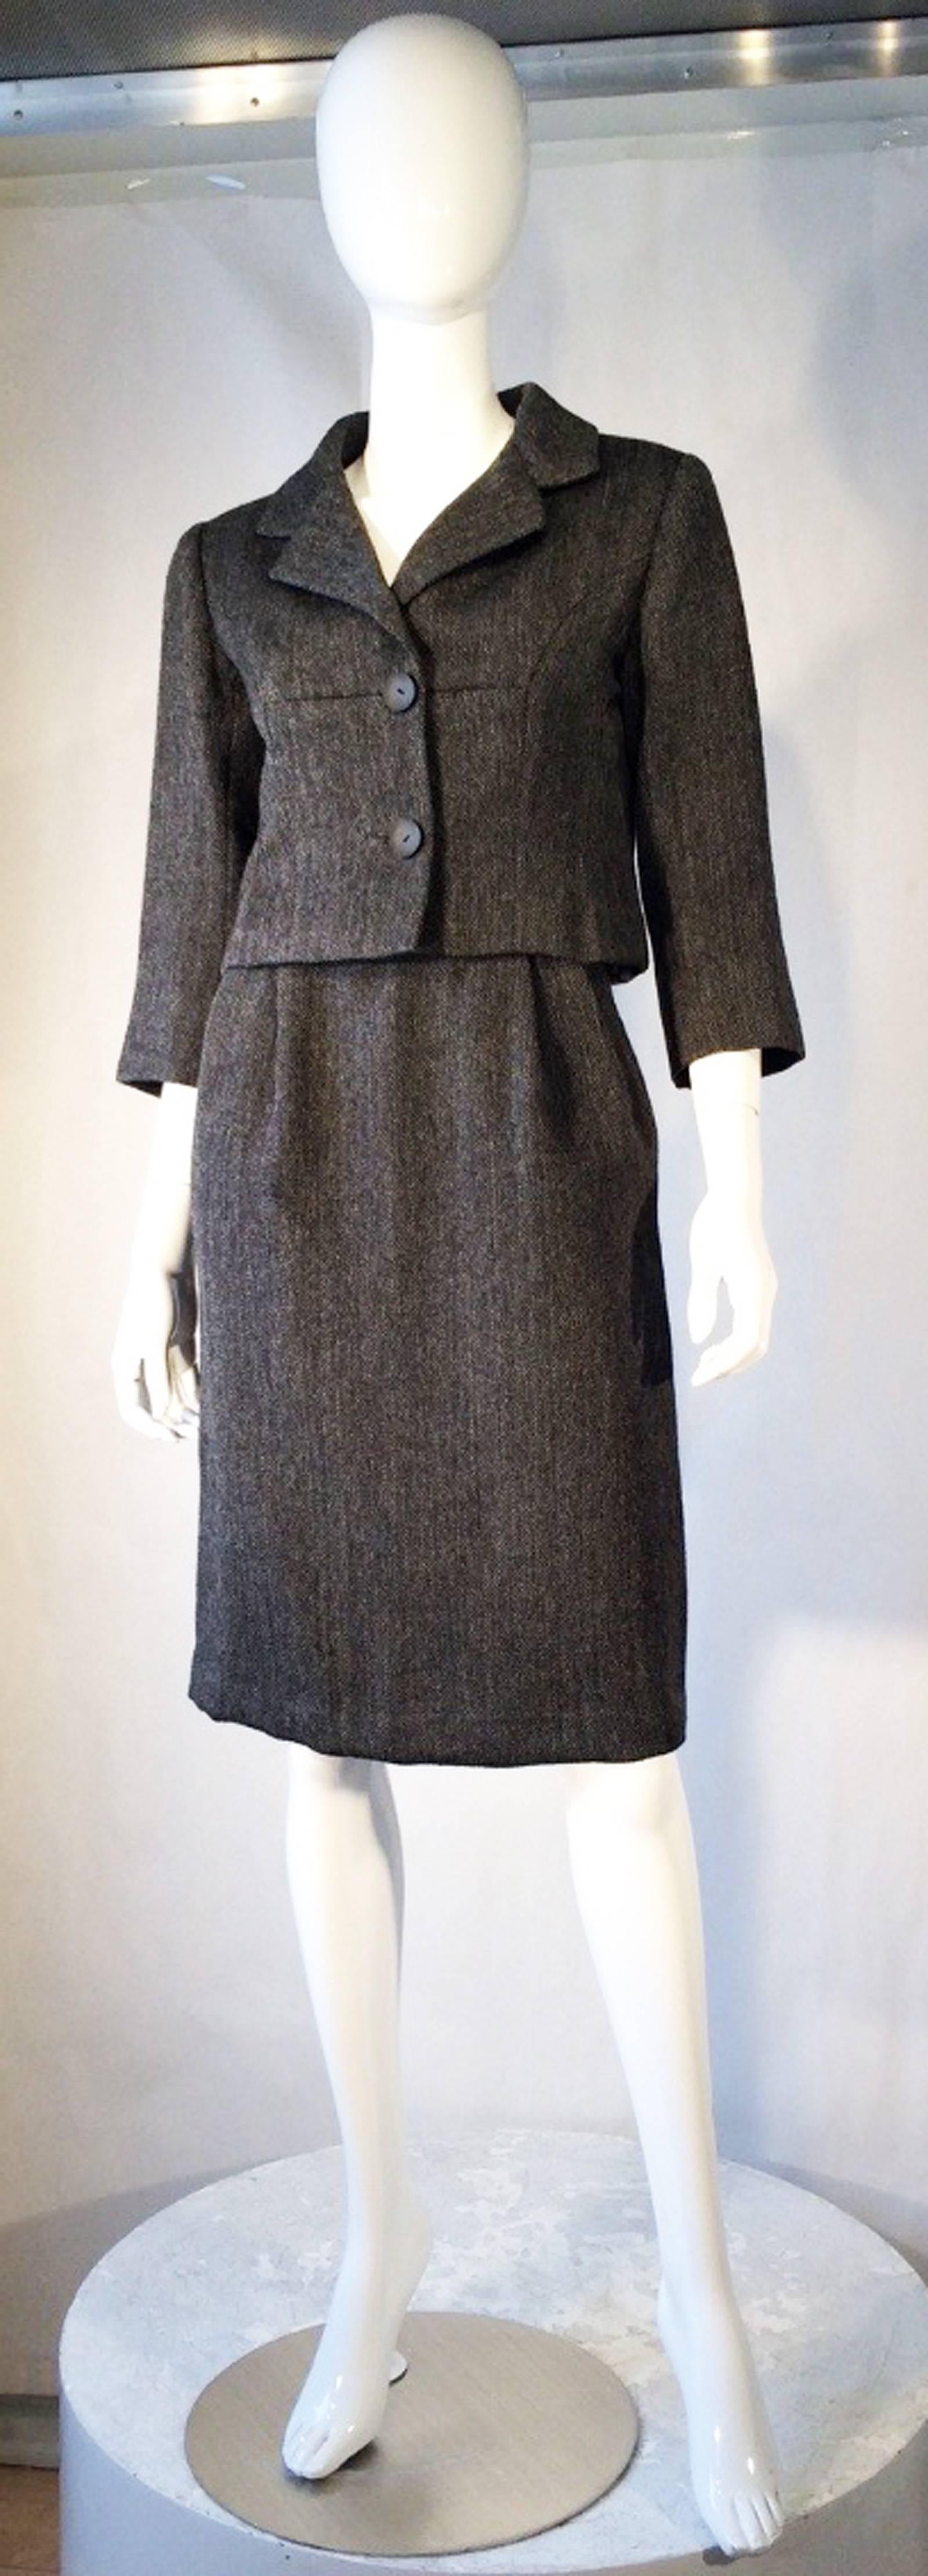 A fine and rare vintage Balenciaga haute couture skirt suit. Authentic numbered item circa 1957. Exquisite charcoal 2pc. wool tweed fabric items feature precision seams with original buttons, zippers, hooks and silk lining. Excellent item with no